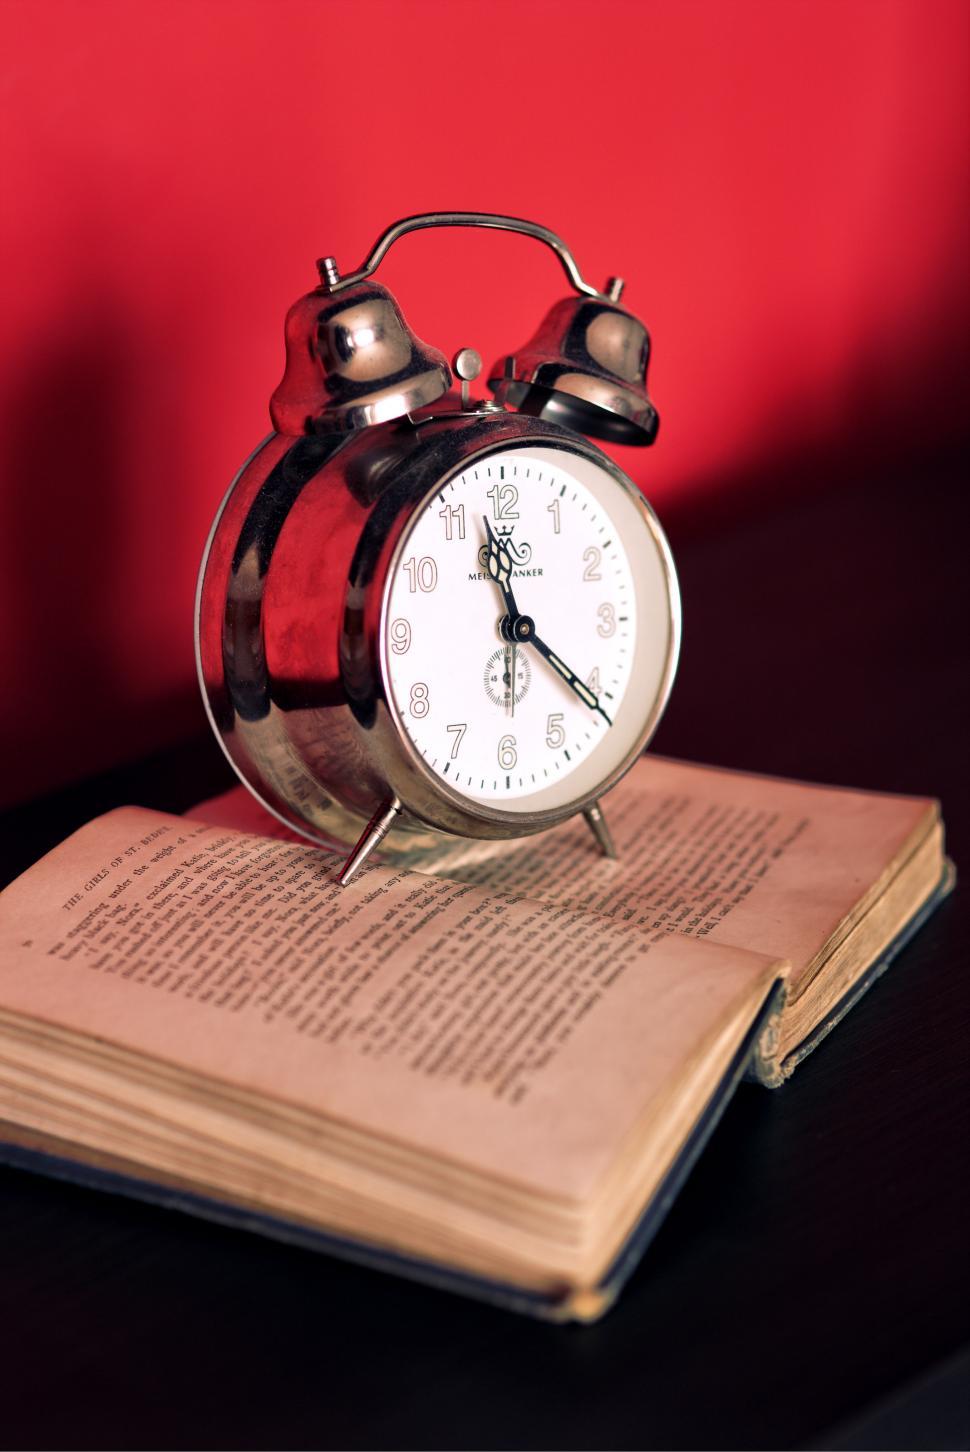 Free Image of Alarm Clock on Open Book 